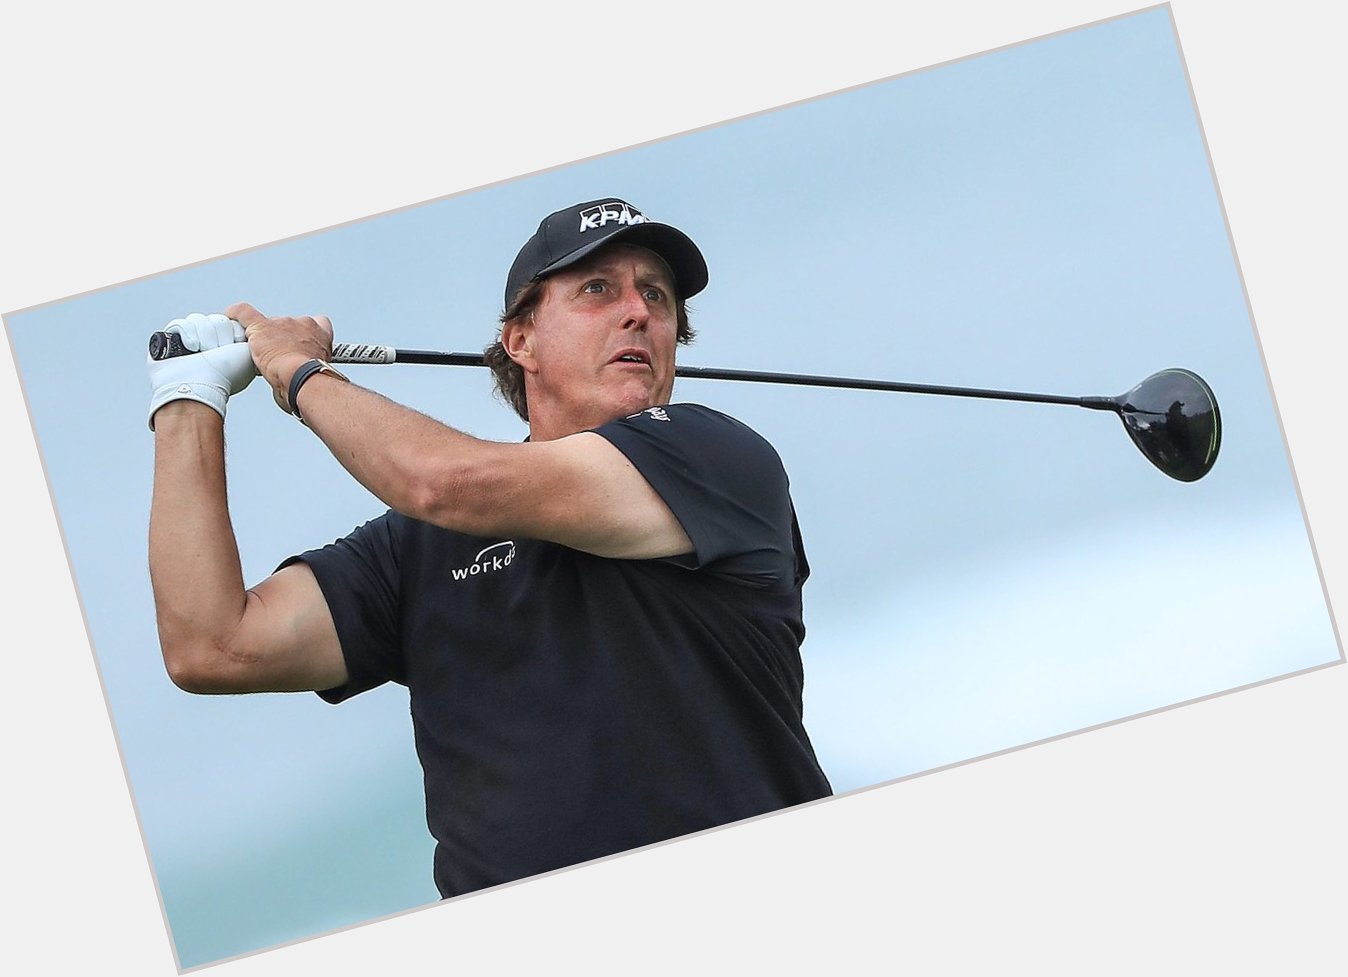 Watch: Fans sing \happy birthday\ to Mickelson on first tee at Pebble Beach  